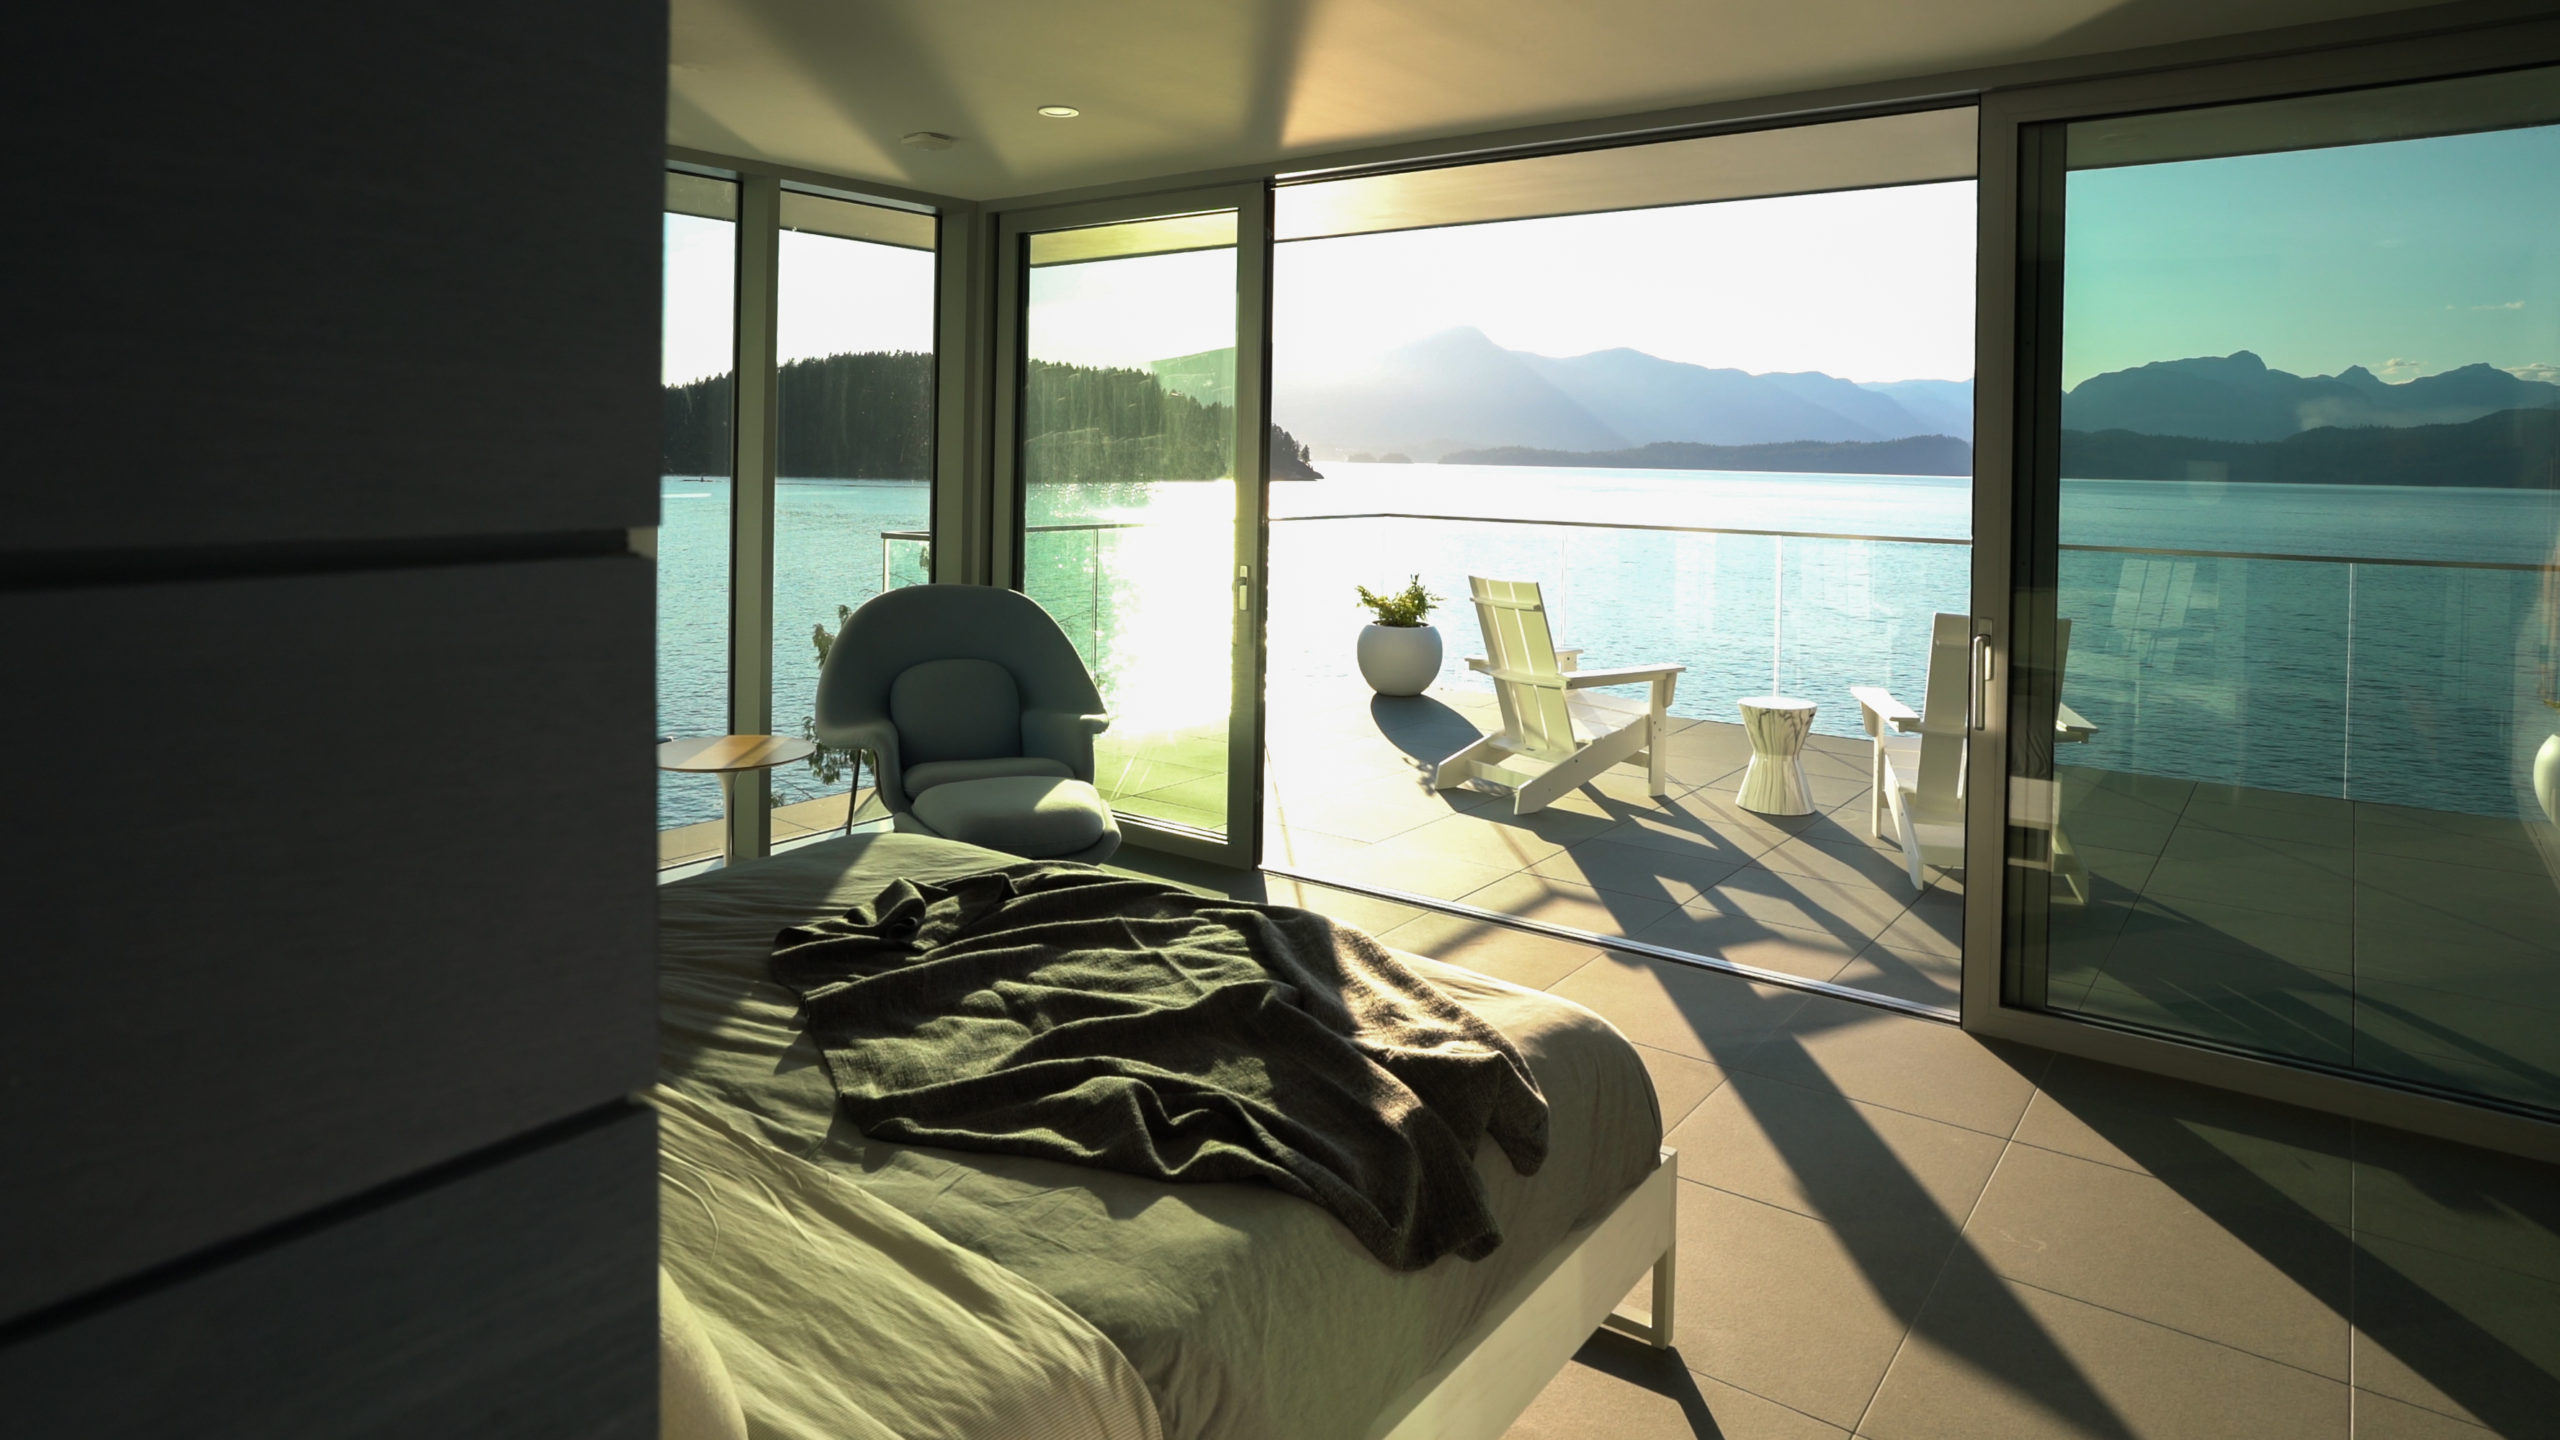 Master bedroom with a modern design, big windows, balcony, and ocean view on Bowen Island.